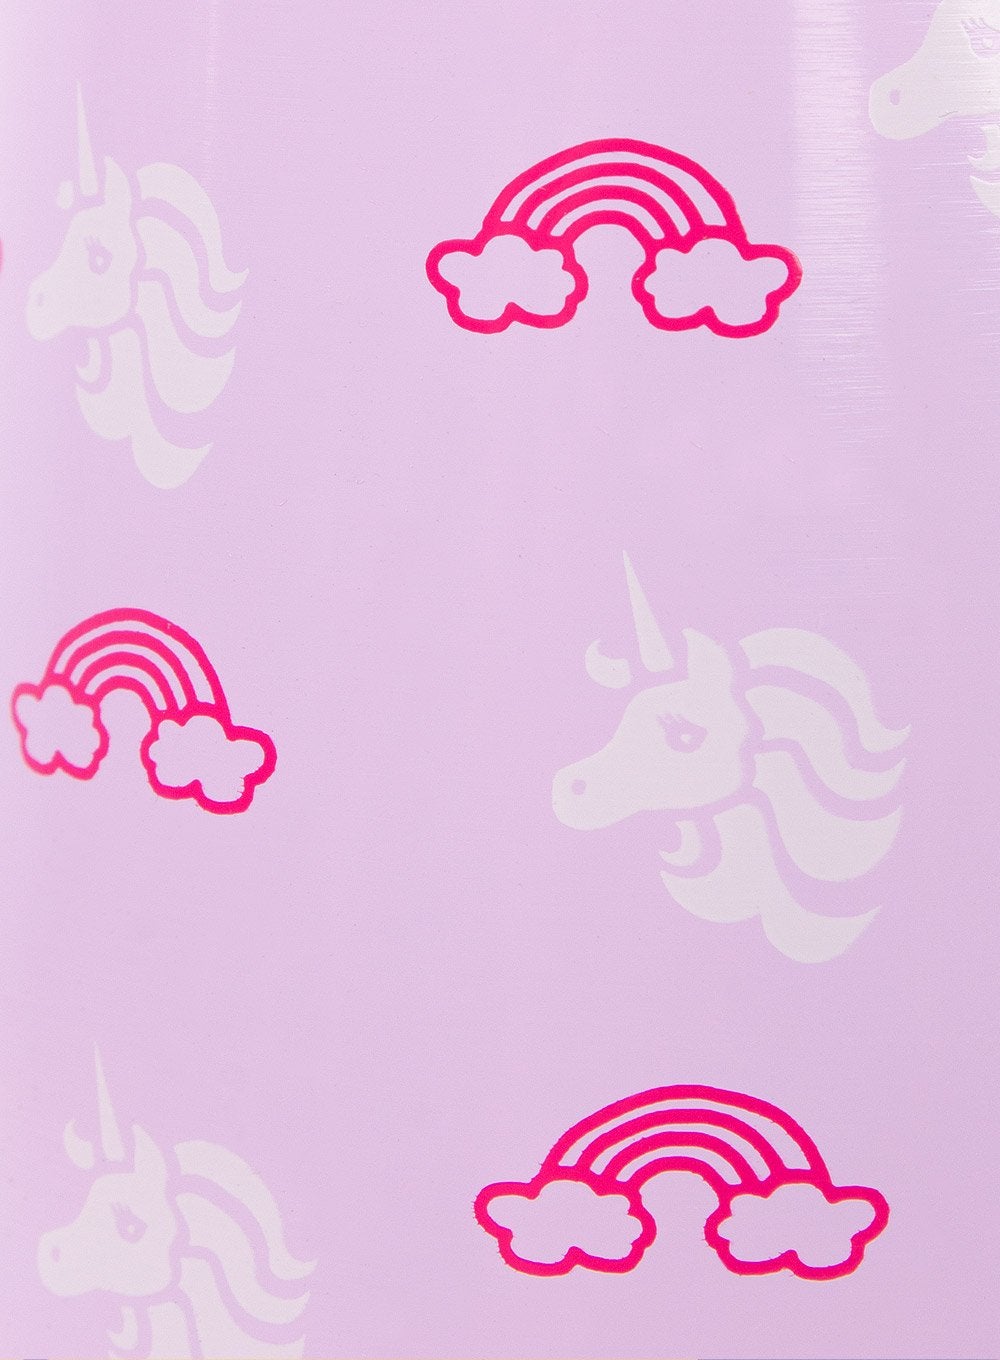 Sip by Swell Insulated Water Bottle in Unicorn Dream – Trotters  Childrenswear USA